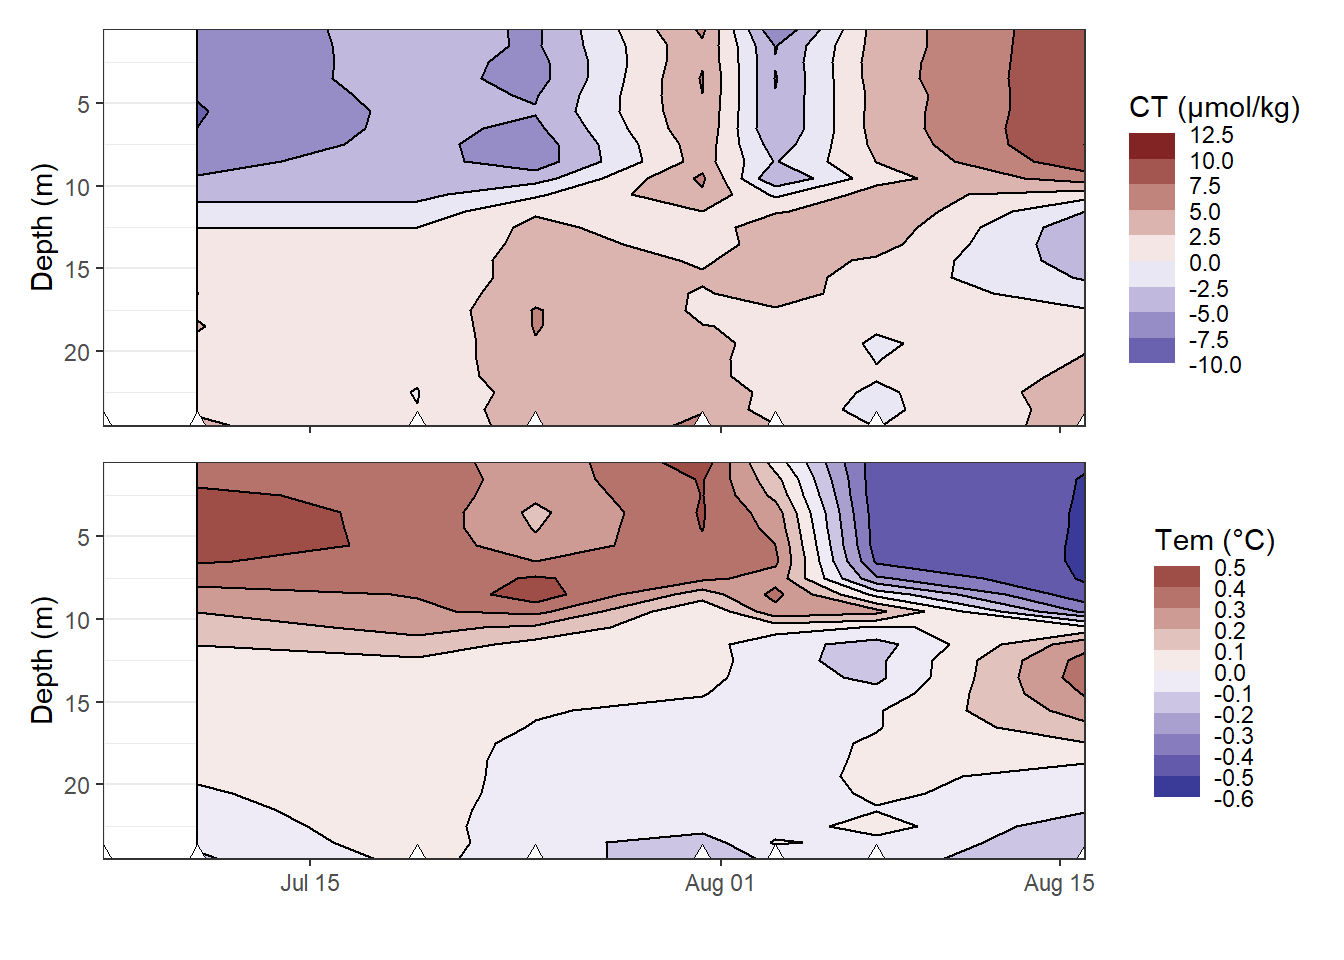 Hovmoeller plots of daily changes in C~T~ and temperature. Note: Daily changes are currently plotted against the day when they were observed compared to the previous transect, although plotting against the mean date would be more plausible.